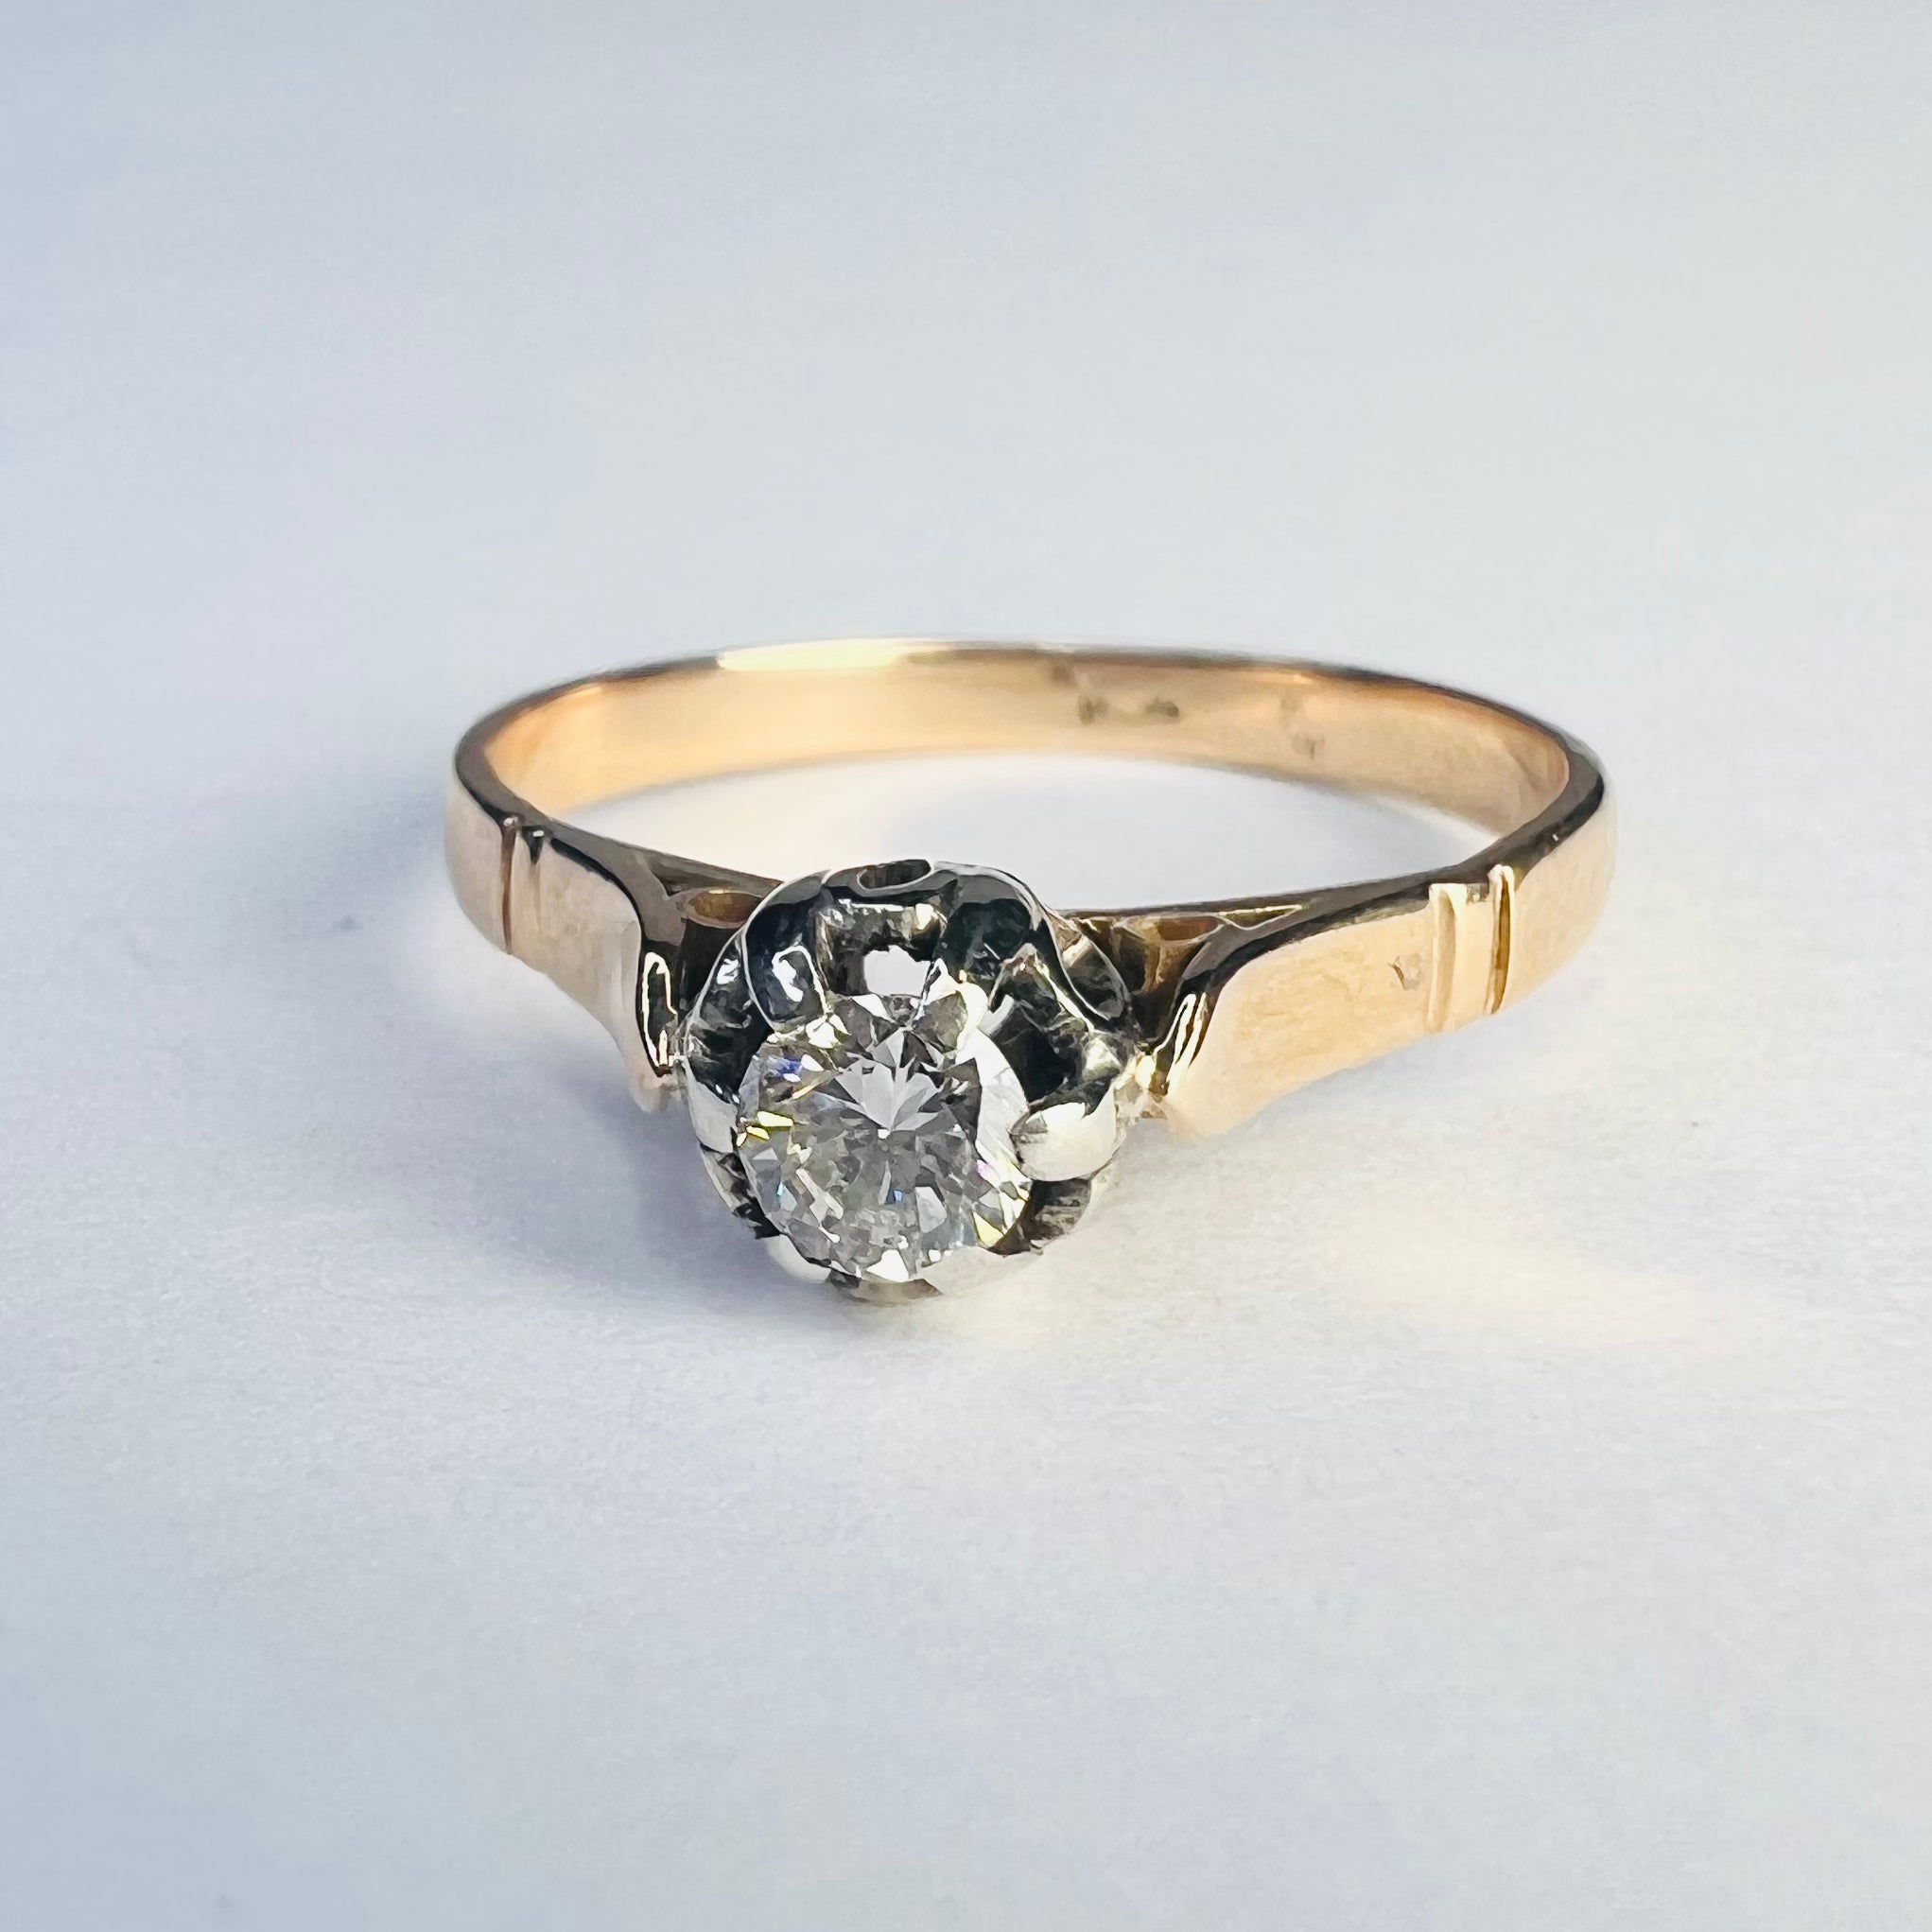 Antique 14K Yellow Gold .24CT Diamond Solitaire Ring Size 7.75